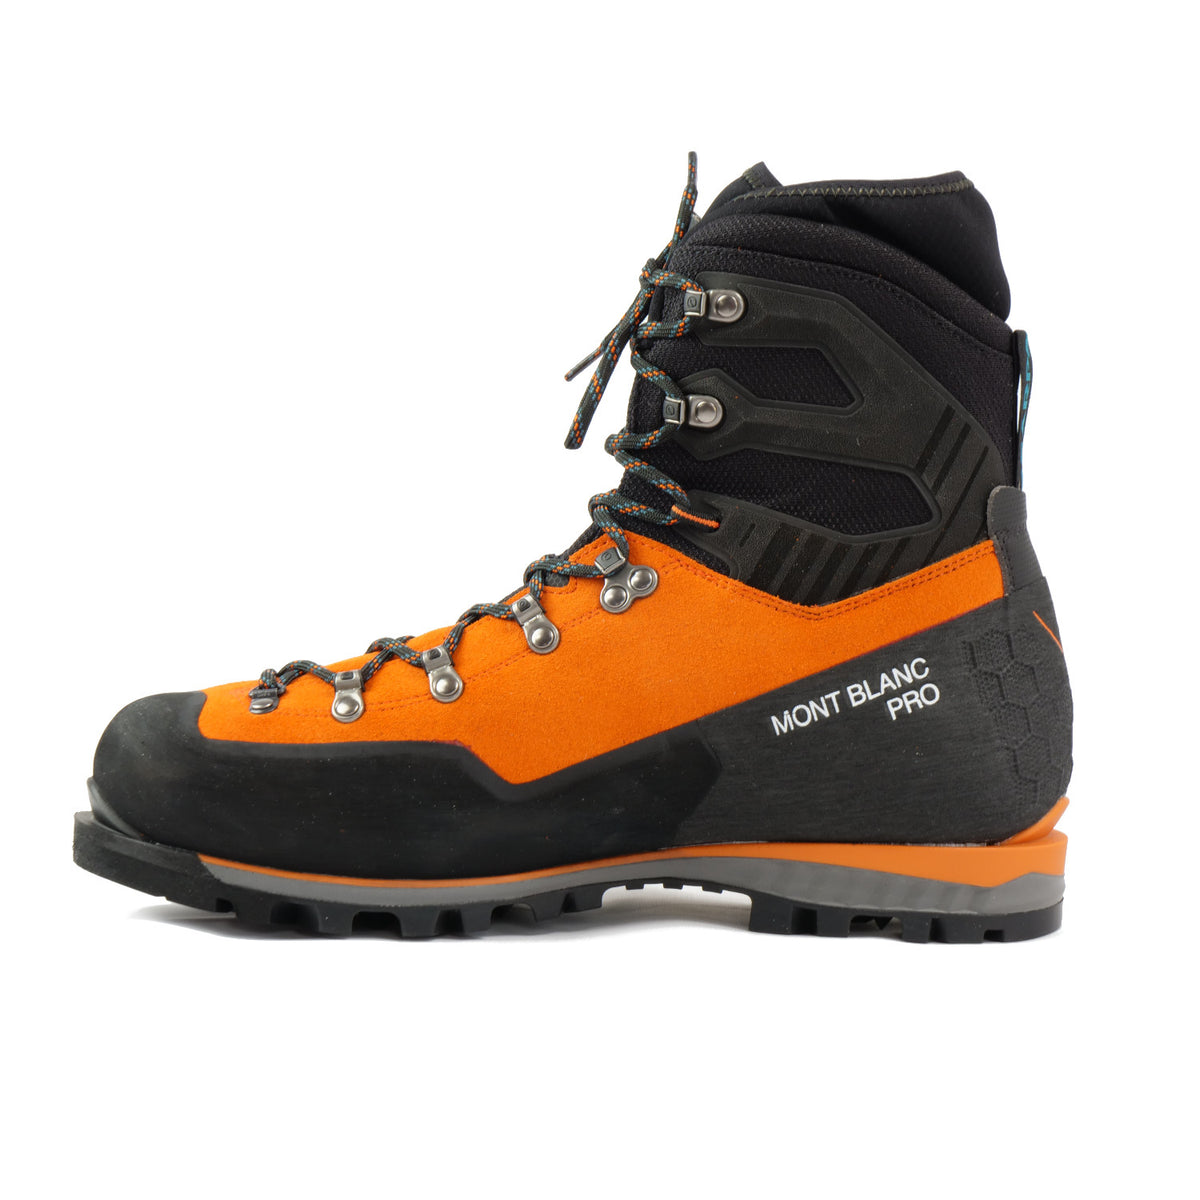 Side view of the Scarpa Mont Blanc Pro GTX with orange Perwanger outer and black rubber and flexible sock and Small Mont blanc pro written in white on the side of the shoe 